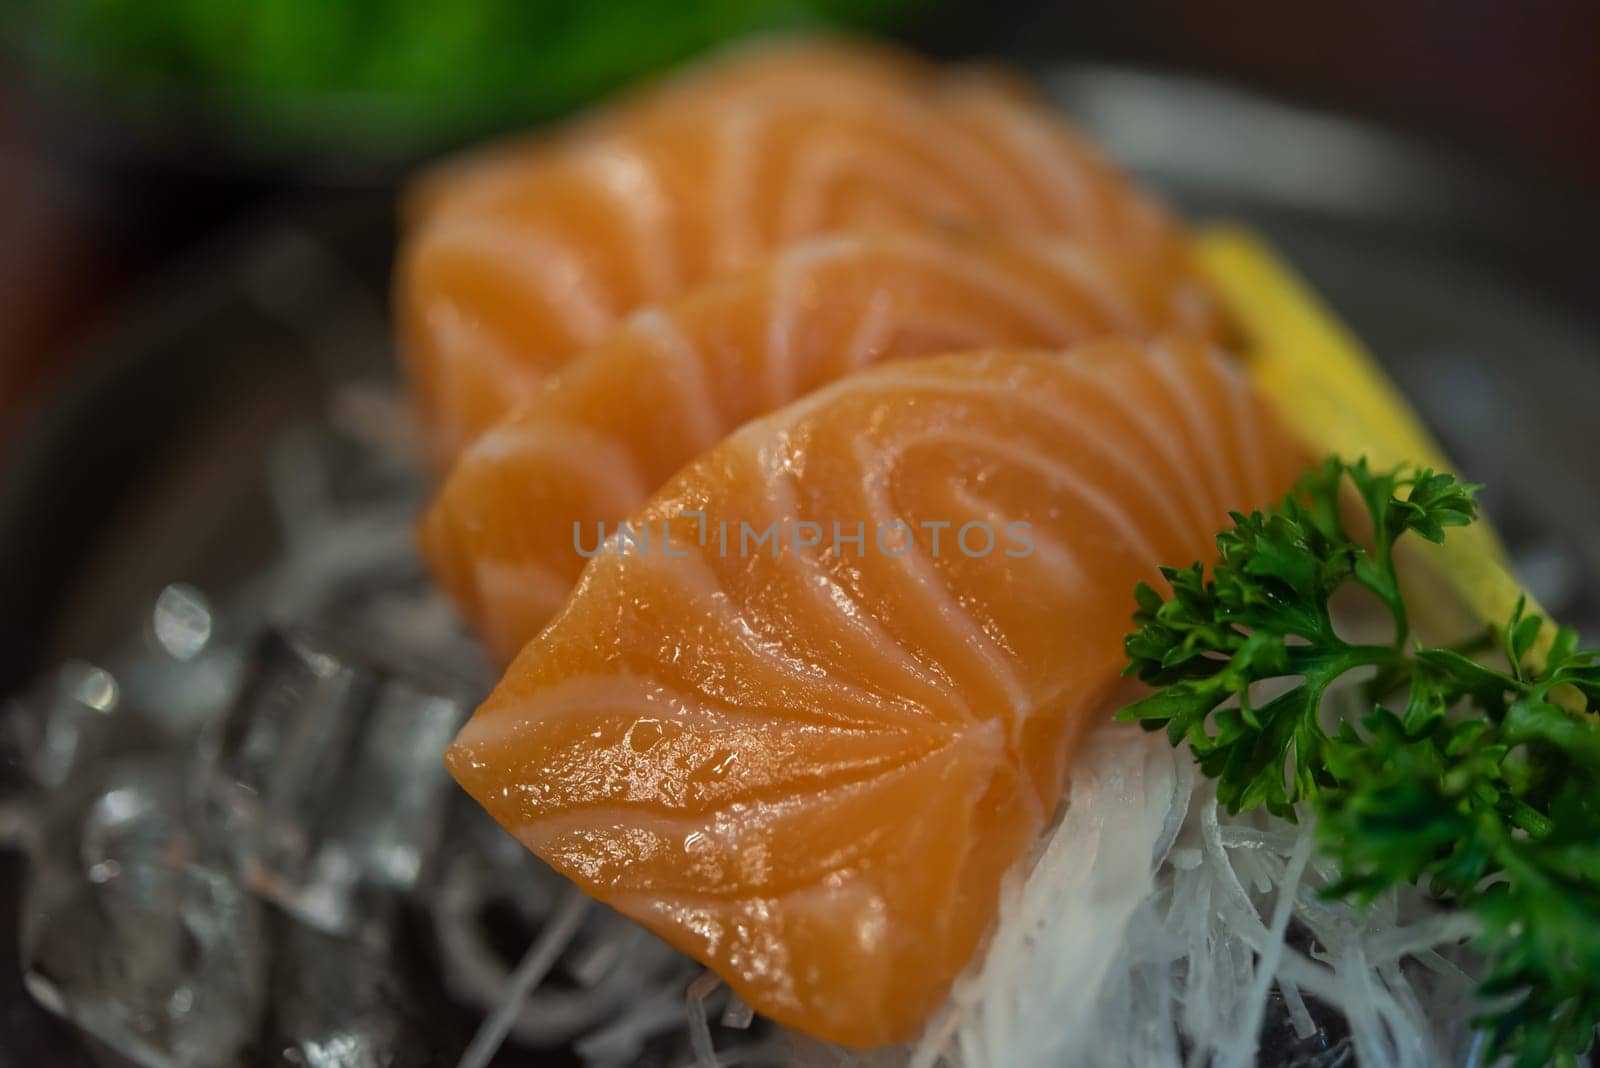 Japanese food delicacy consisting sashimi salmon of very fresh raw salmon fish sliced into thin pieces serving with radish sliced in japan restaurant